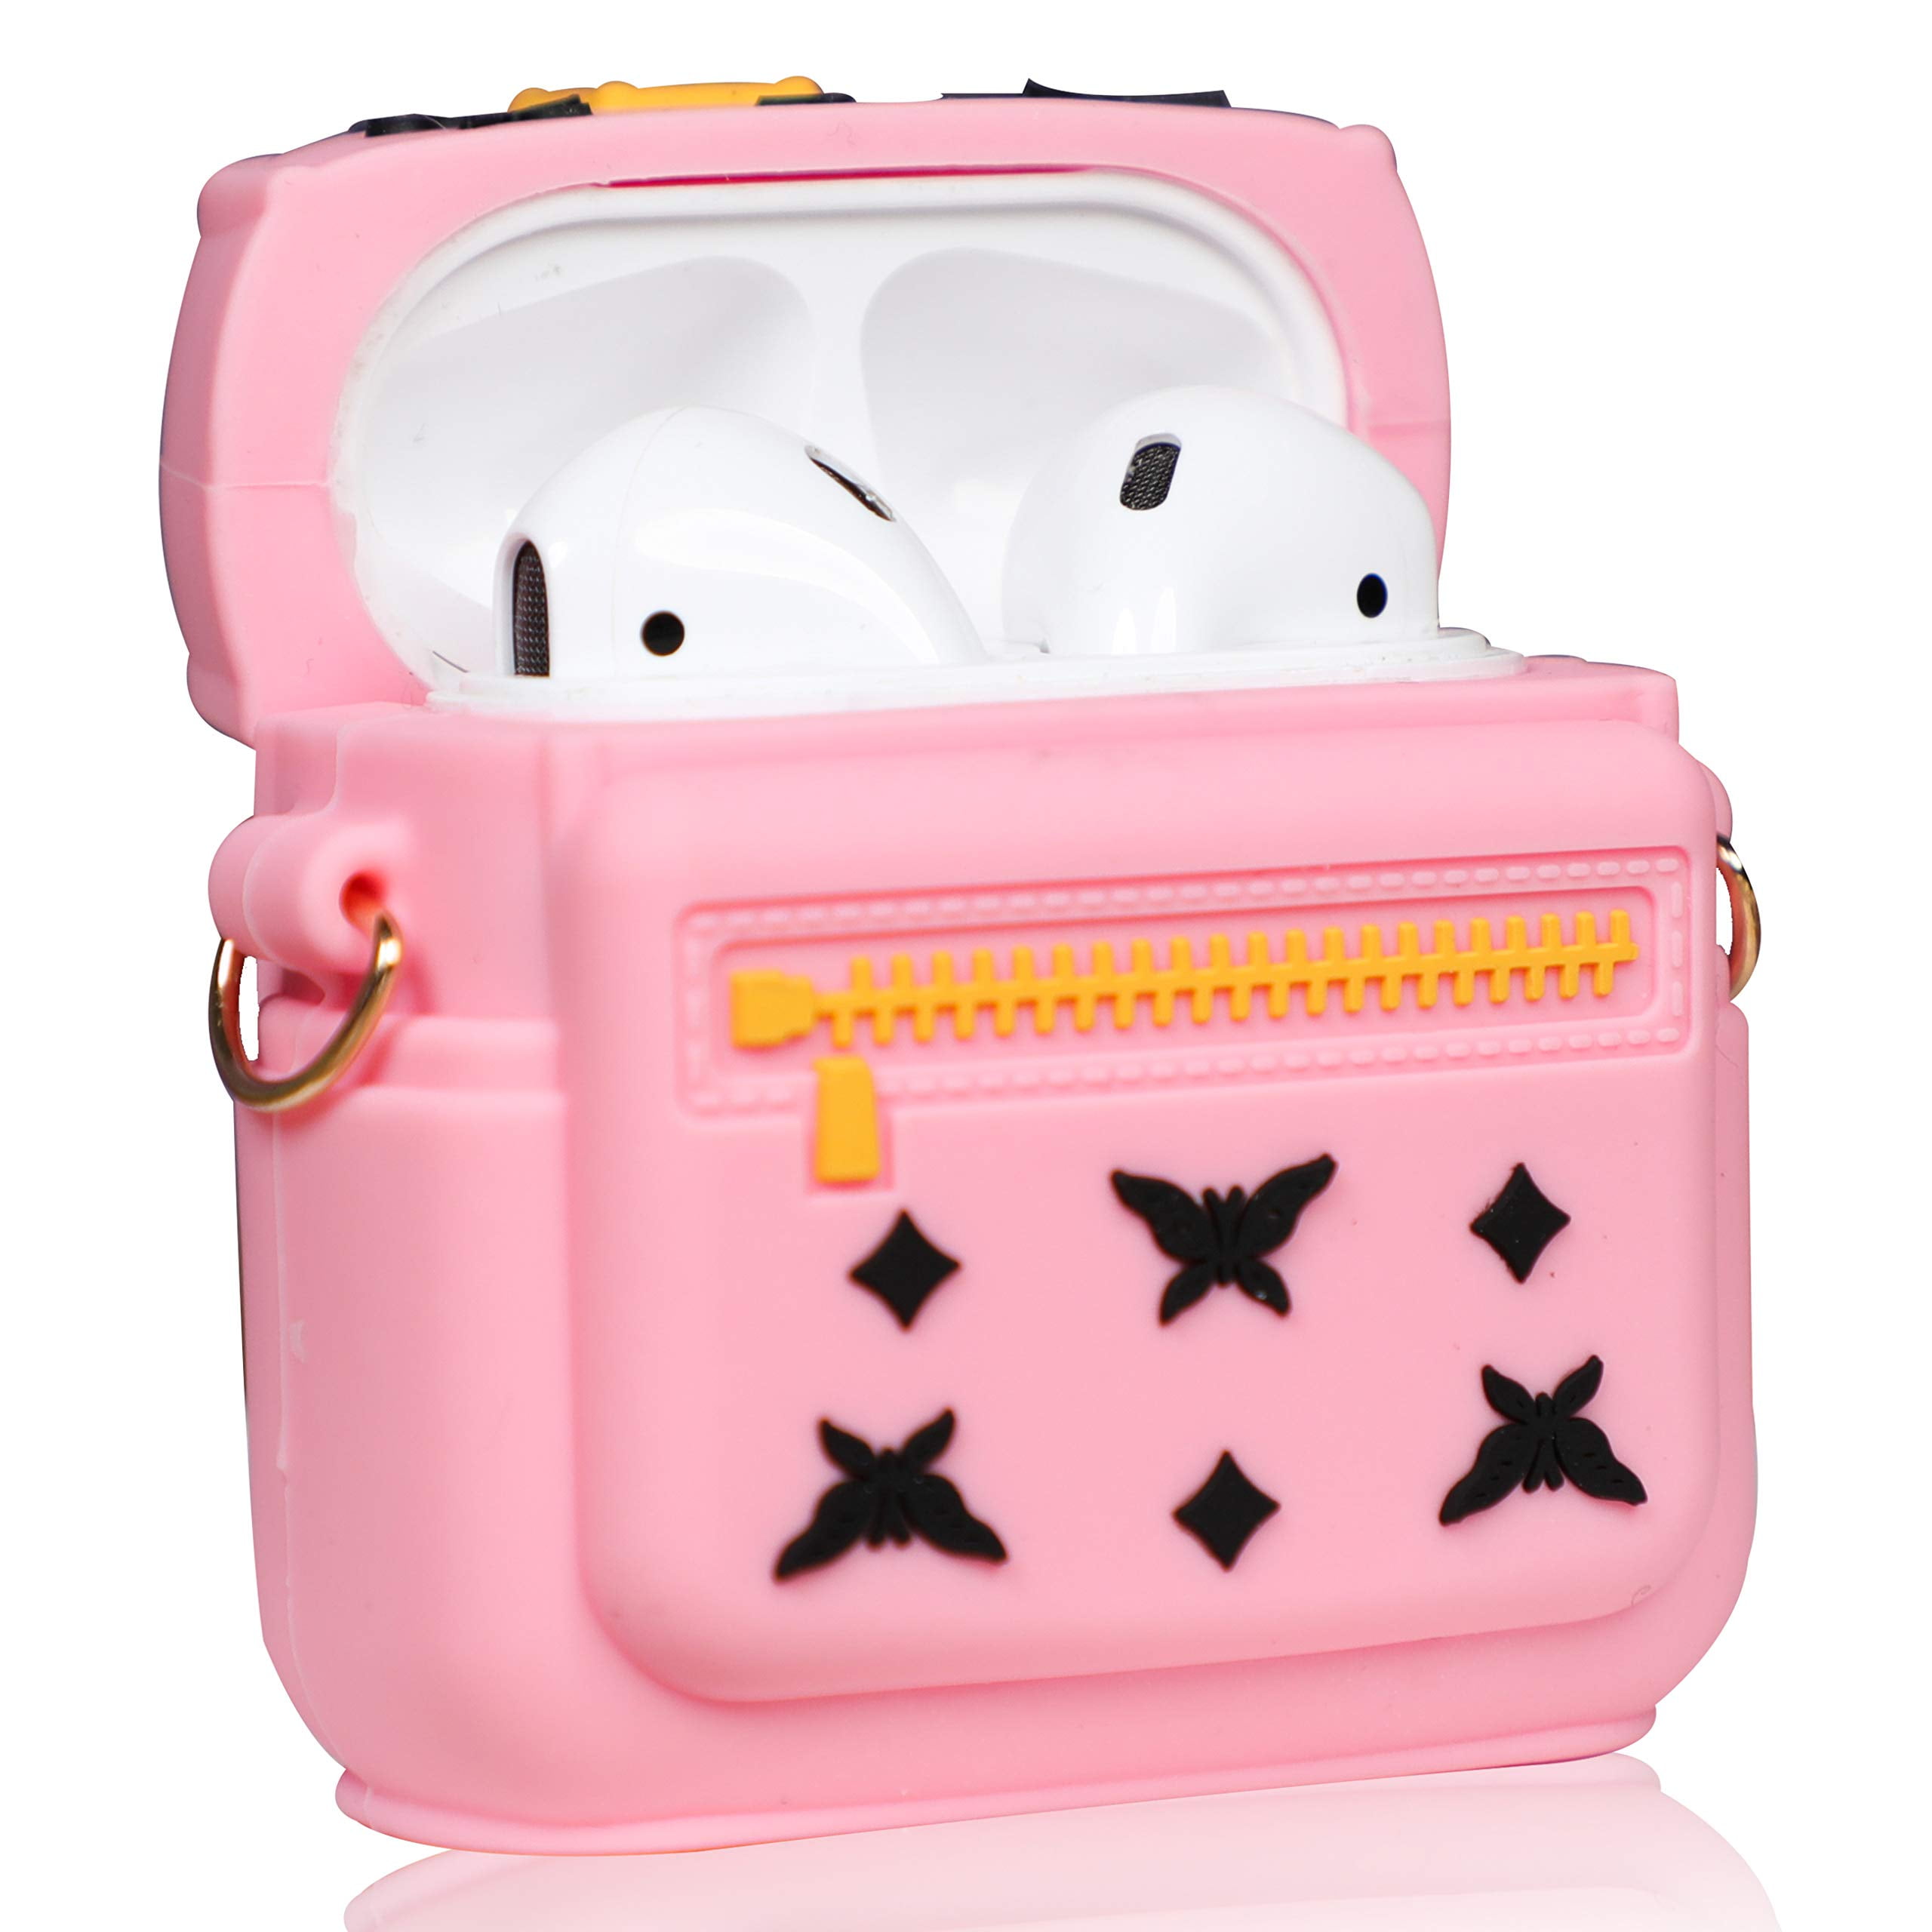 Jowhep Case for Airpod 2/1 Cartoon Design Cute Silicone Cover with Keychain Fashion Funny Shockproof Soft Protective Skin for Air Pods Girls Kids